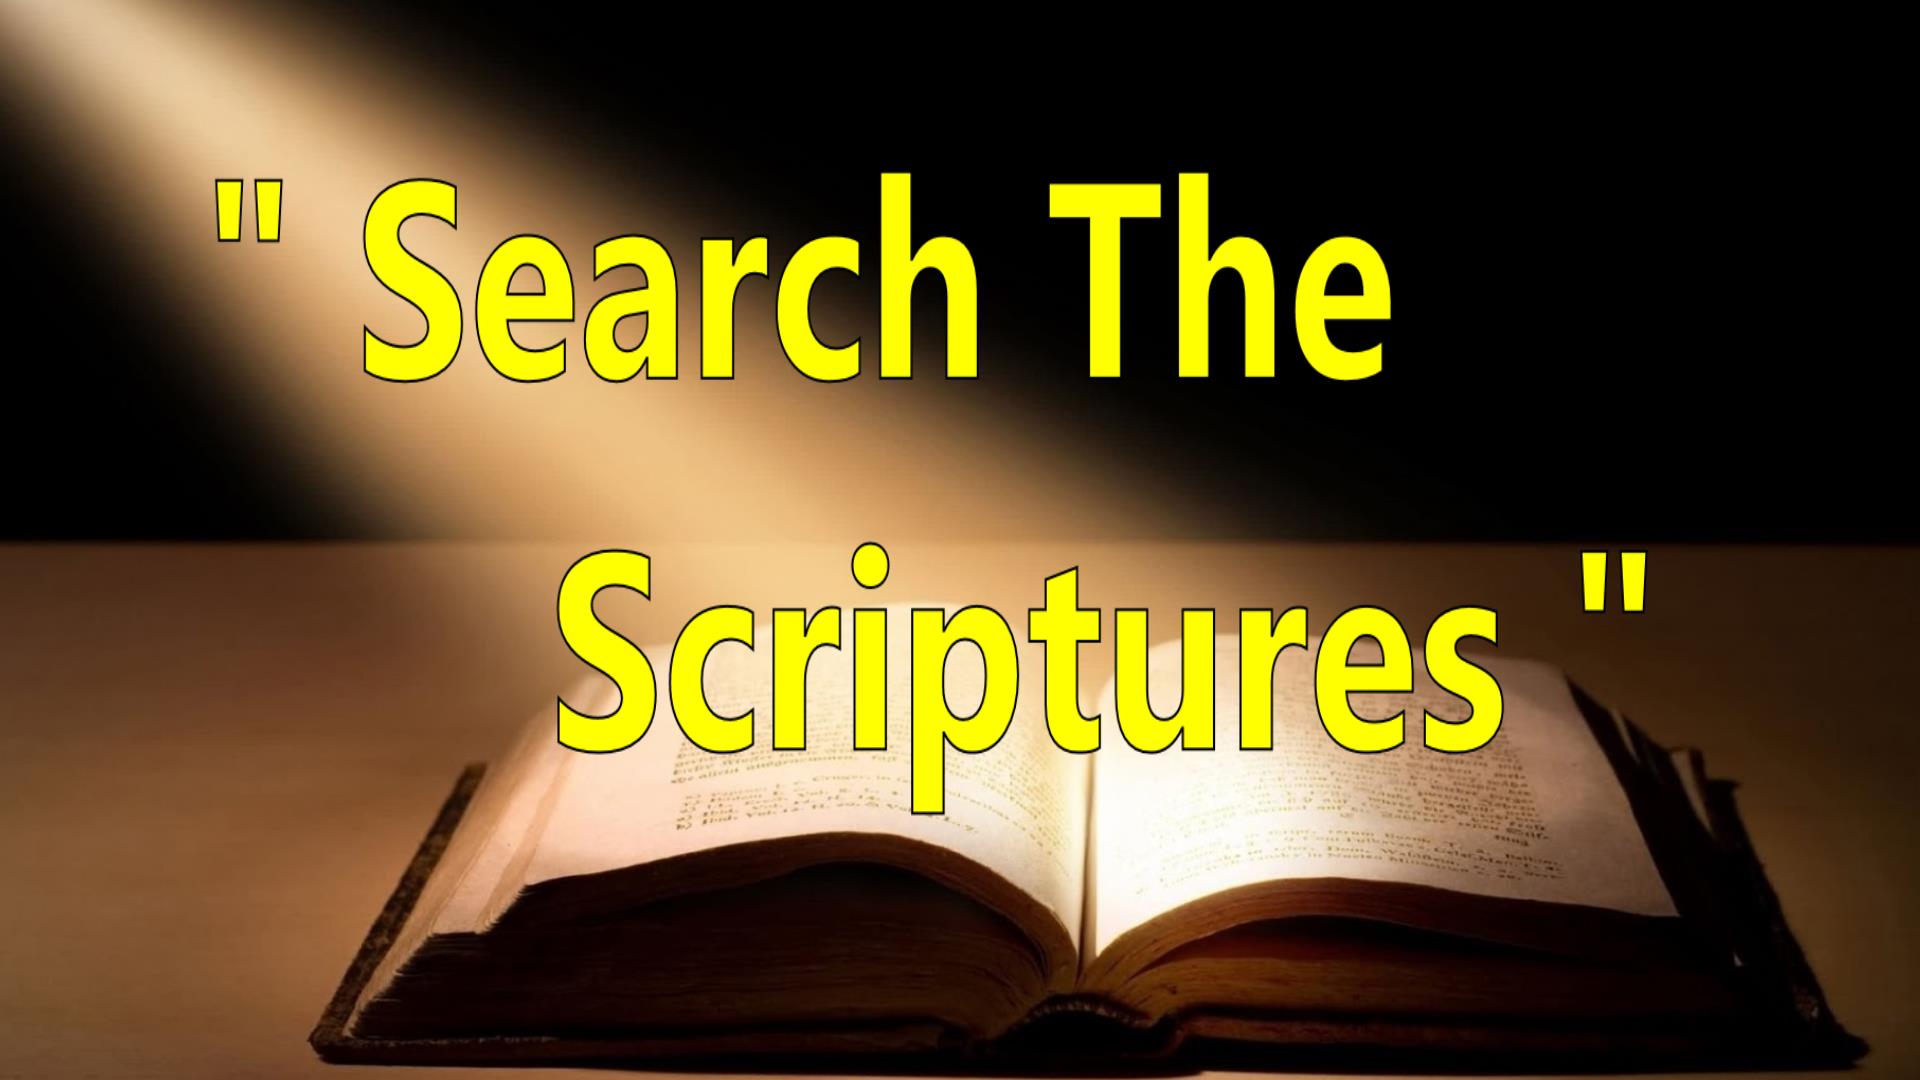 SEARCH THE SCRIPTURES